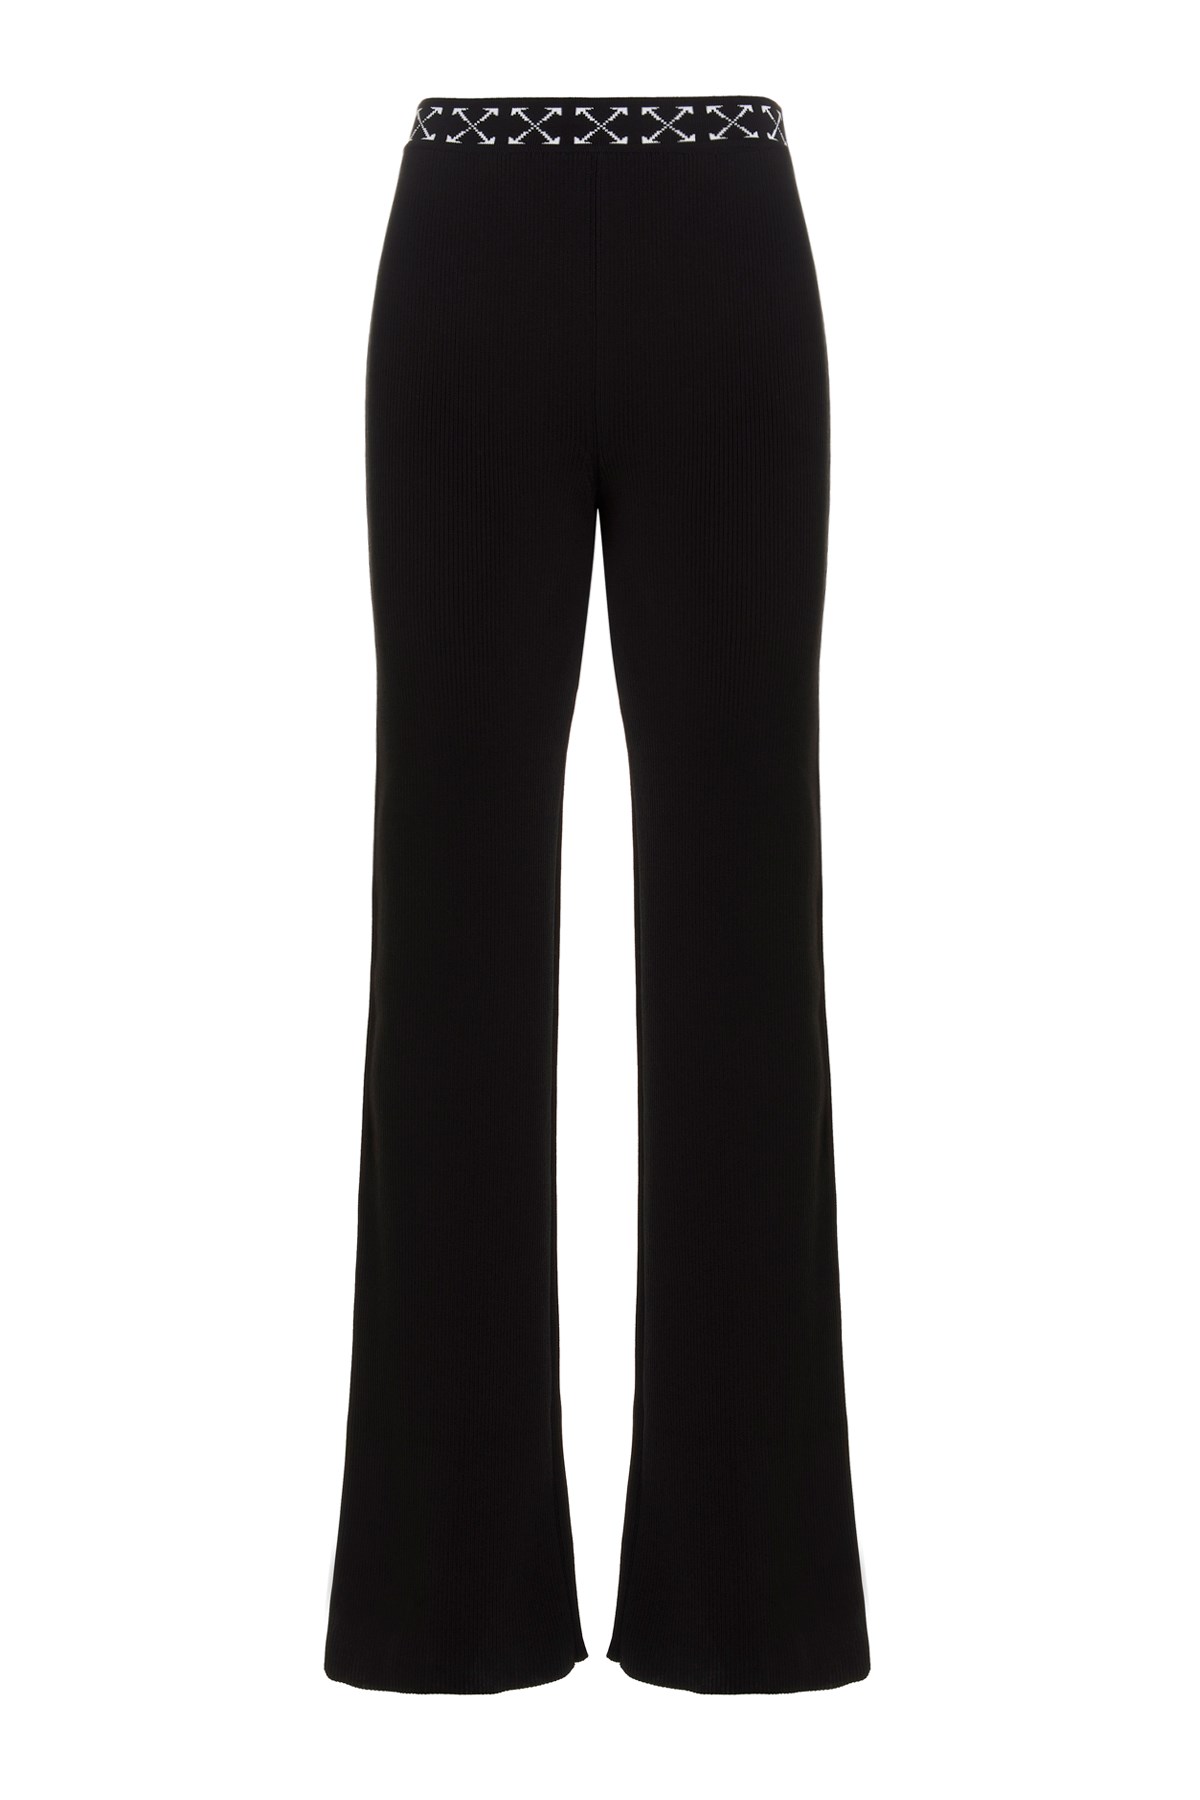 OFF-WHITE 'Bold’ Trousers